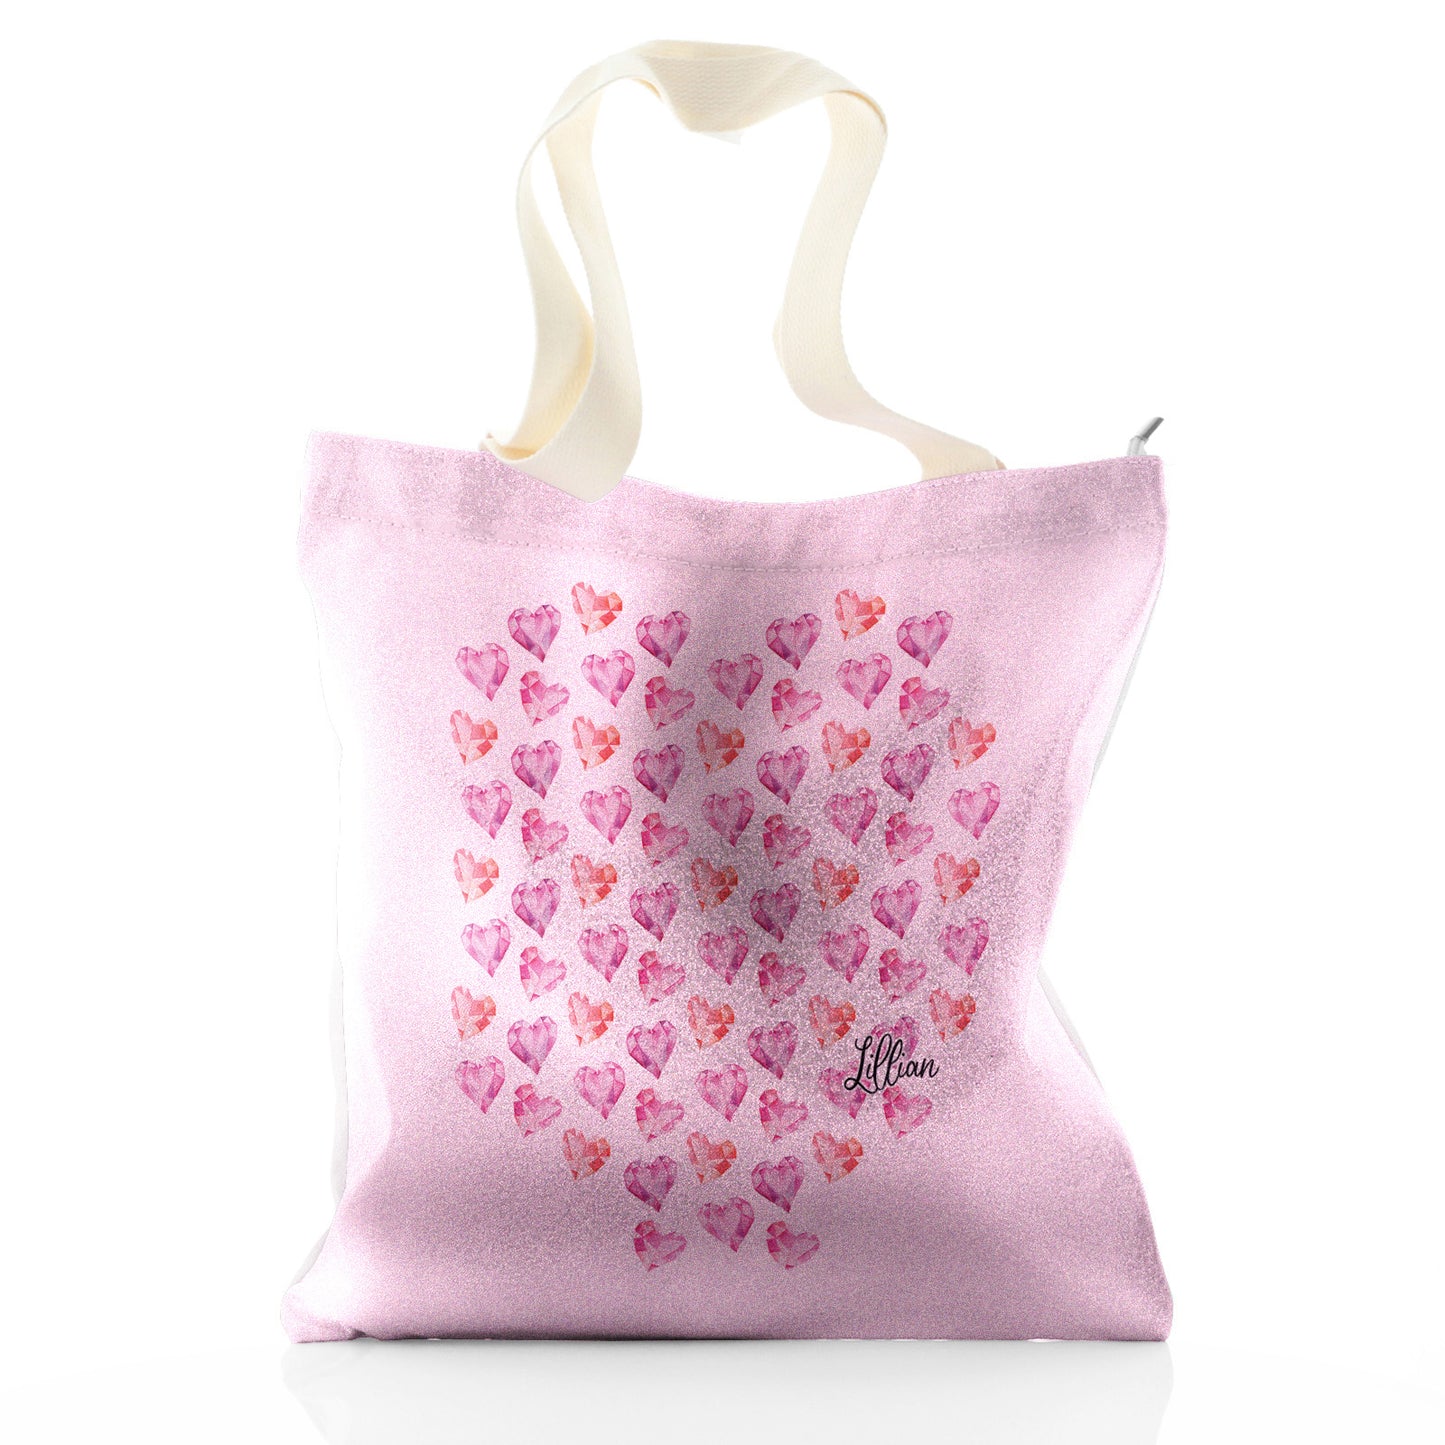 Personalised Glitter Tote Bag with Stylish Text and Crystal Hearts Print